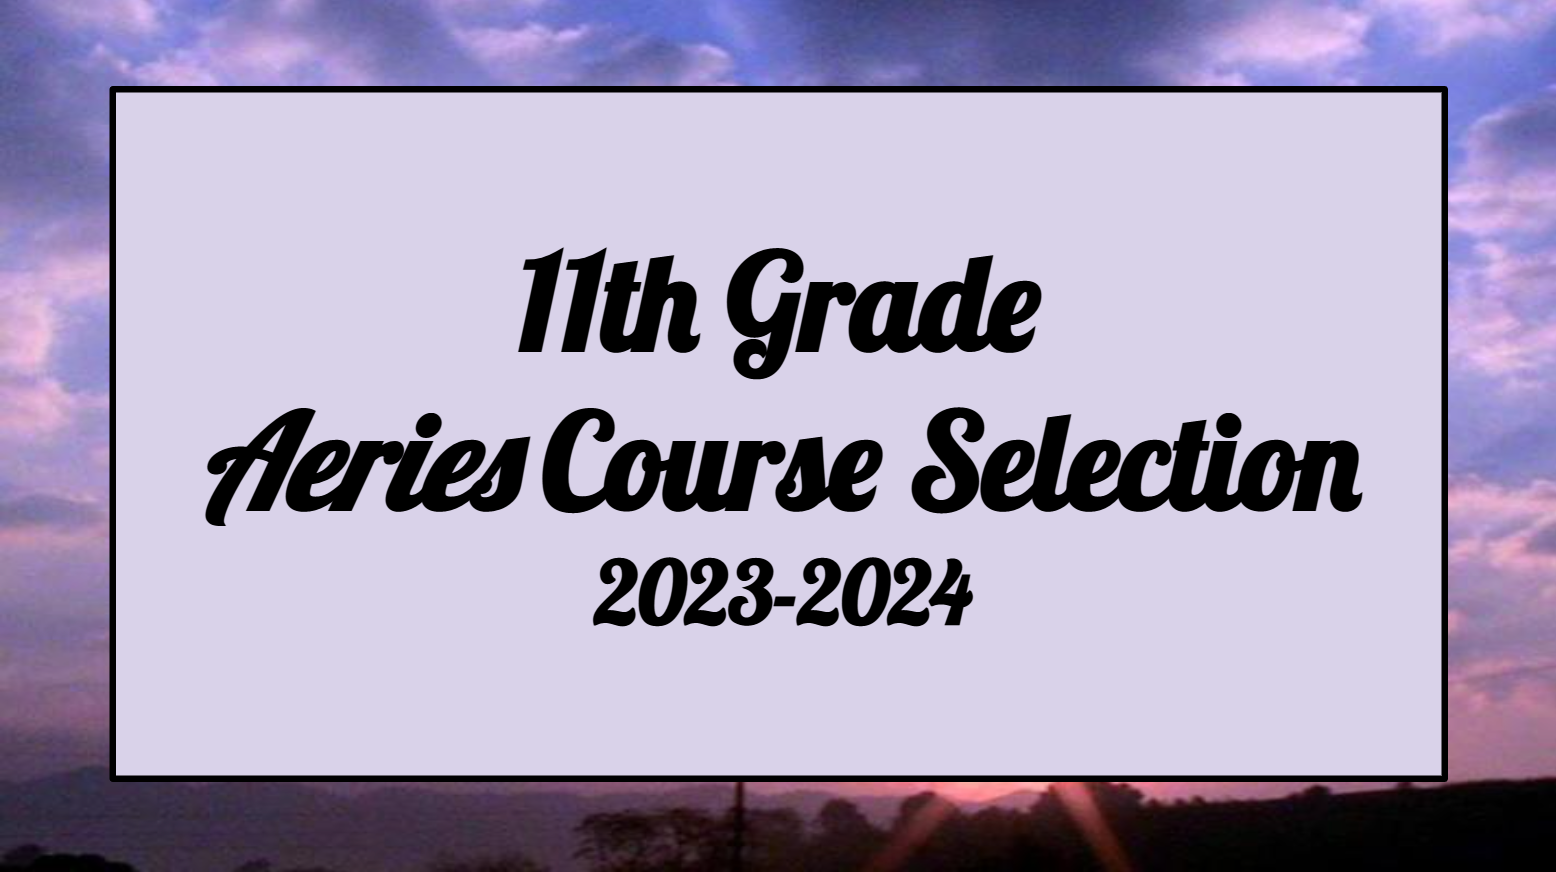 10th Grade Couse Selection Slides